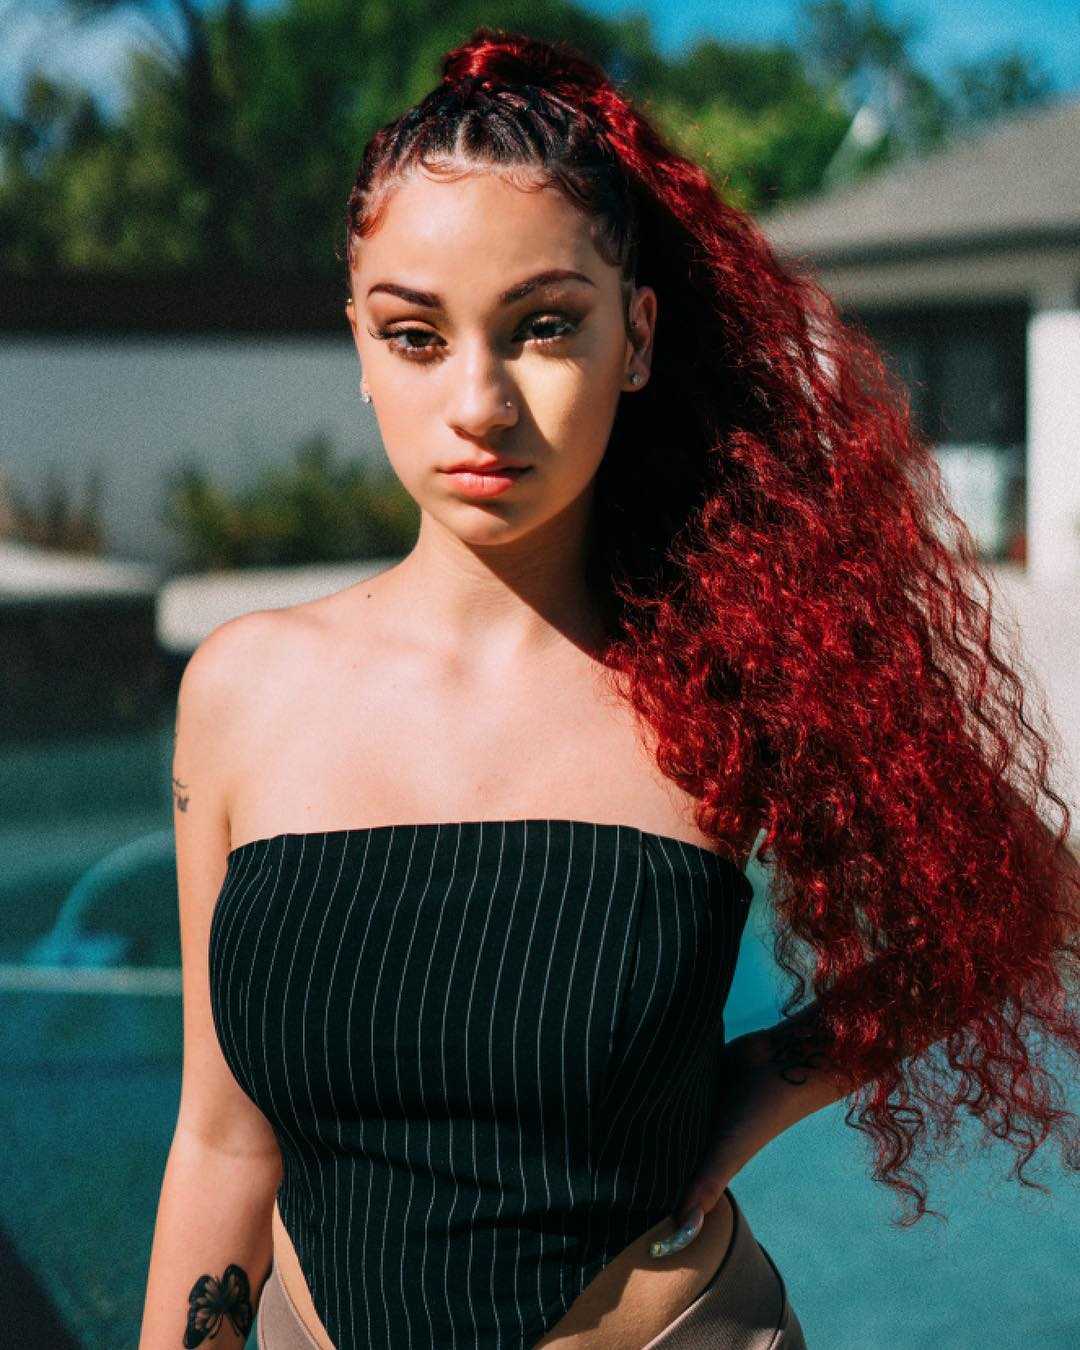 70+ Hot Pictures Of Danielle Bregoli aka Bhad Bhabie Which Will Win Your Heart 6